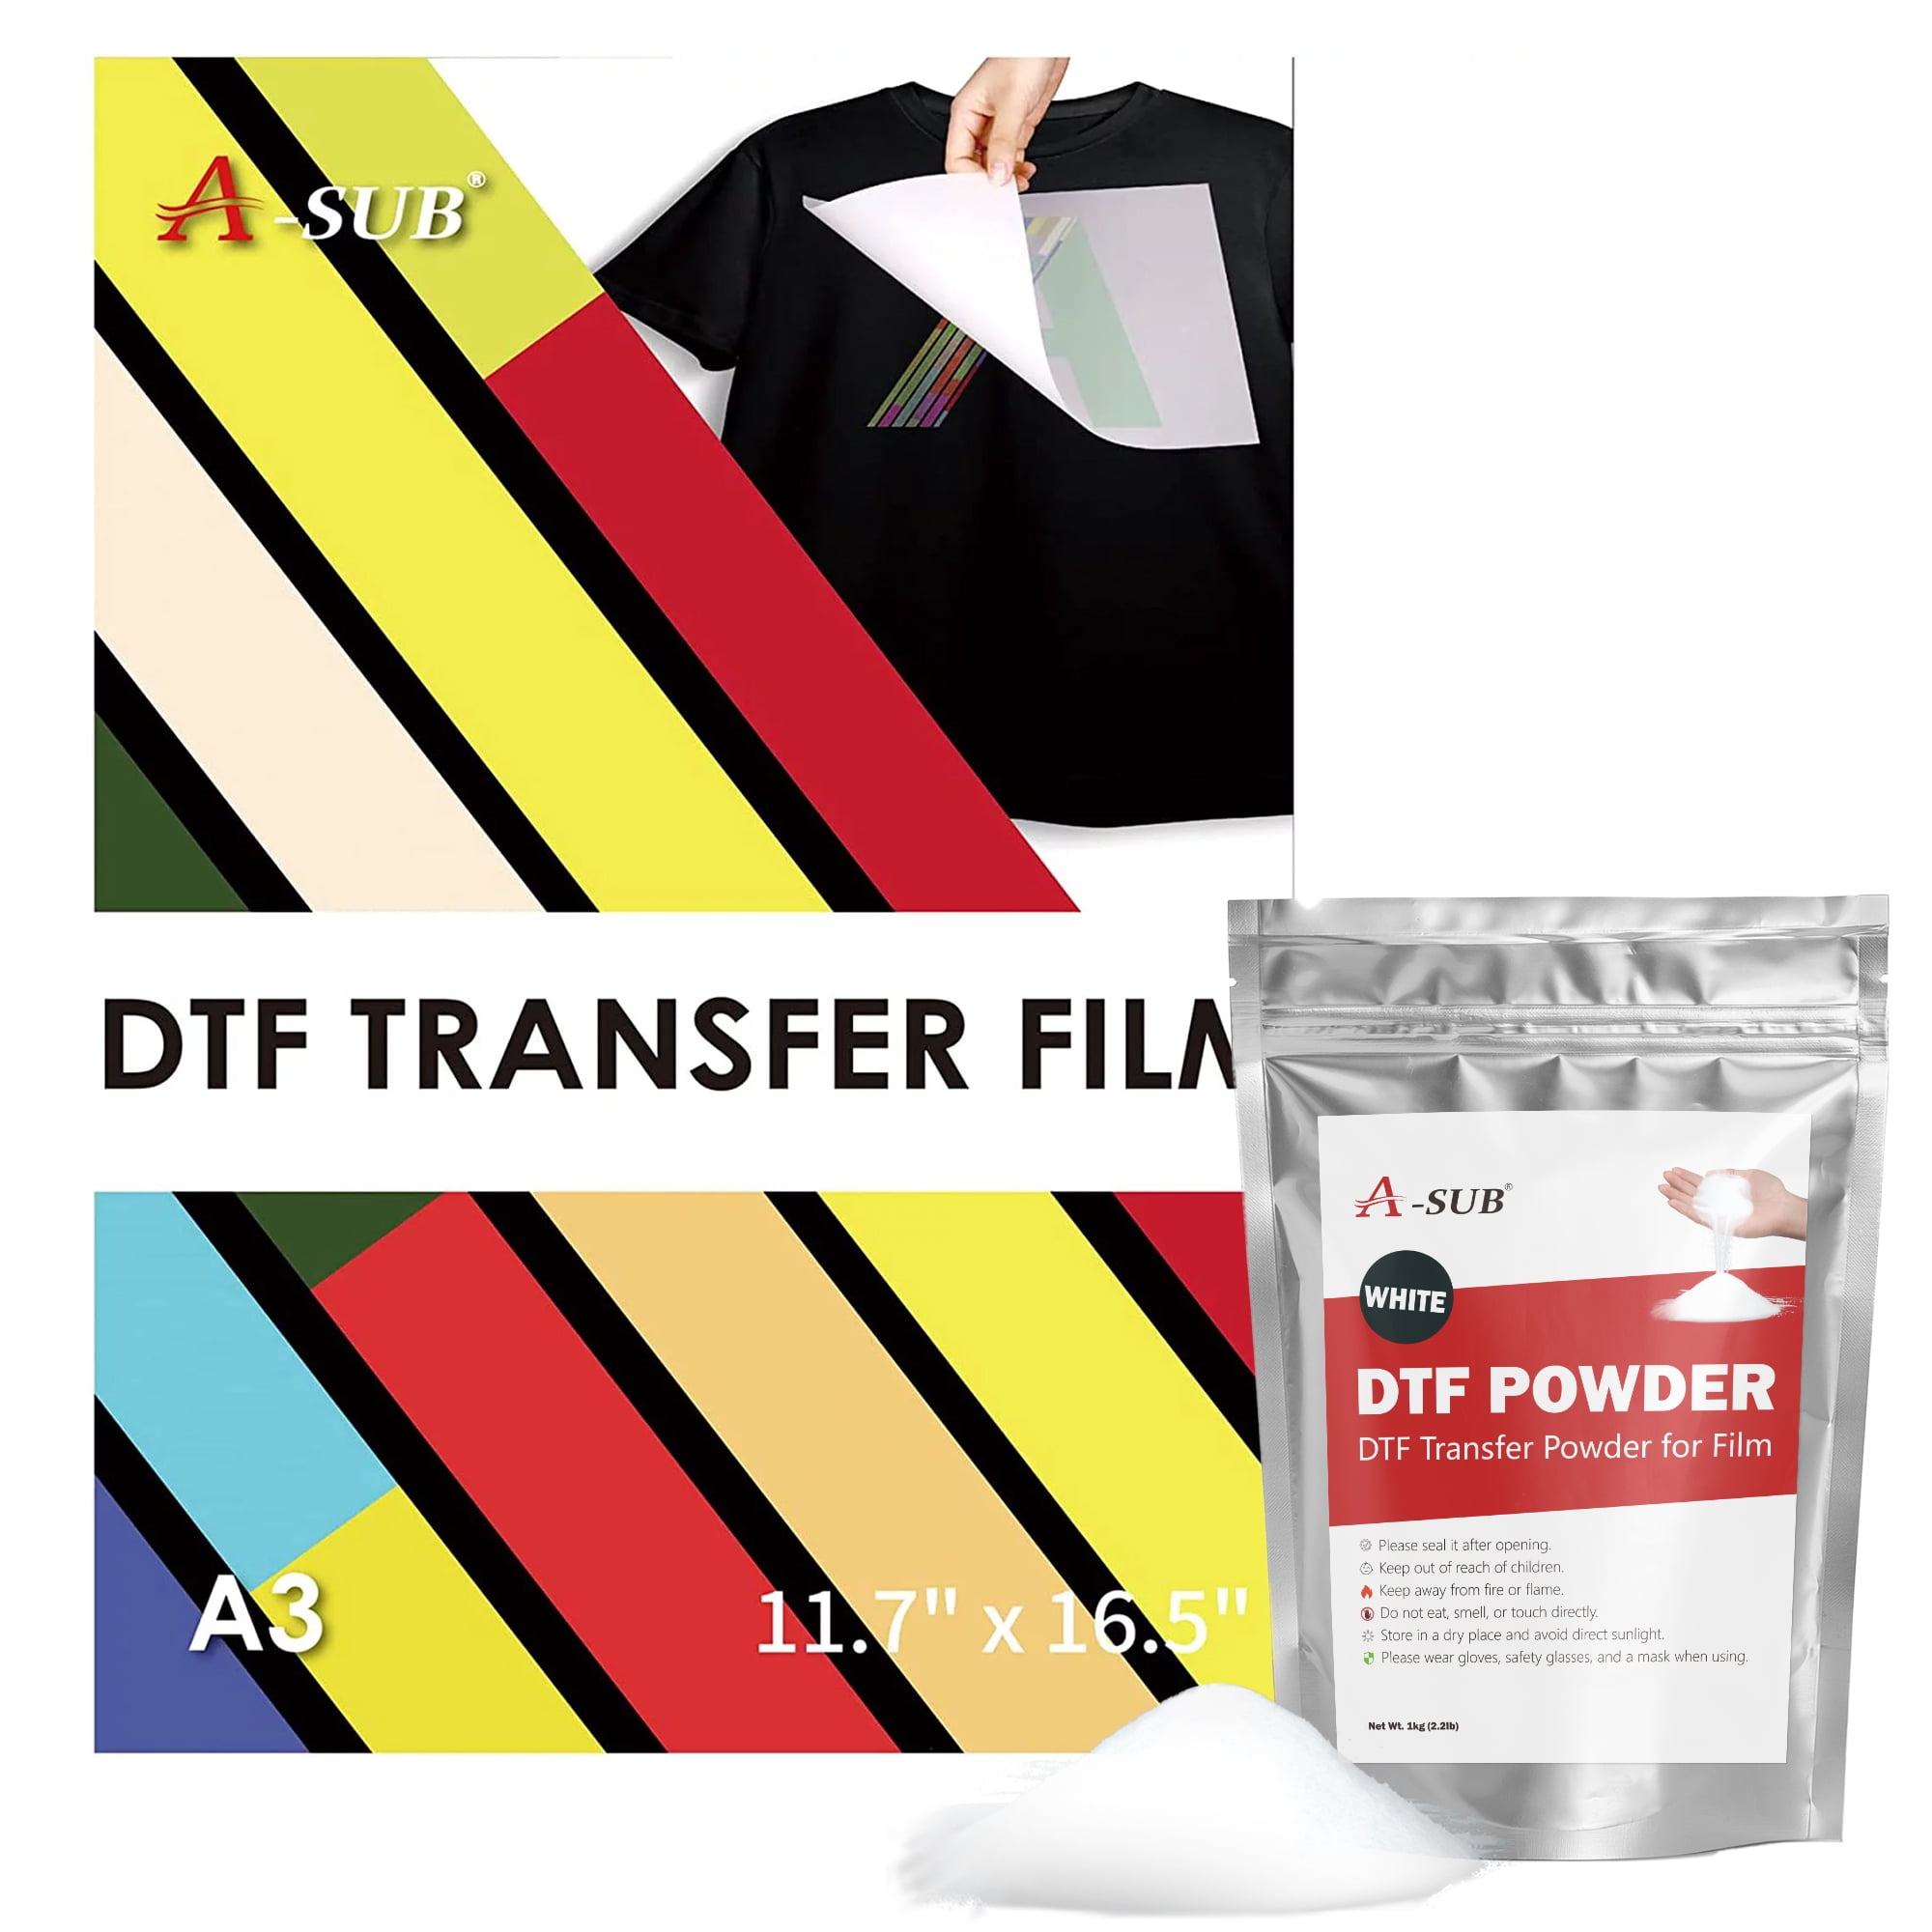  CenDale DTF Transfer Film - A3 (11.7 x 16.5) 30 Sheets  Double-Sided Matte Clear PreTreat Sheets- PET Heat Transfer Paper for DYI  Direct Print on T-Shirts Textile : Arts, Crafts 